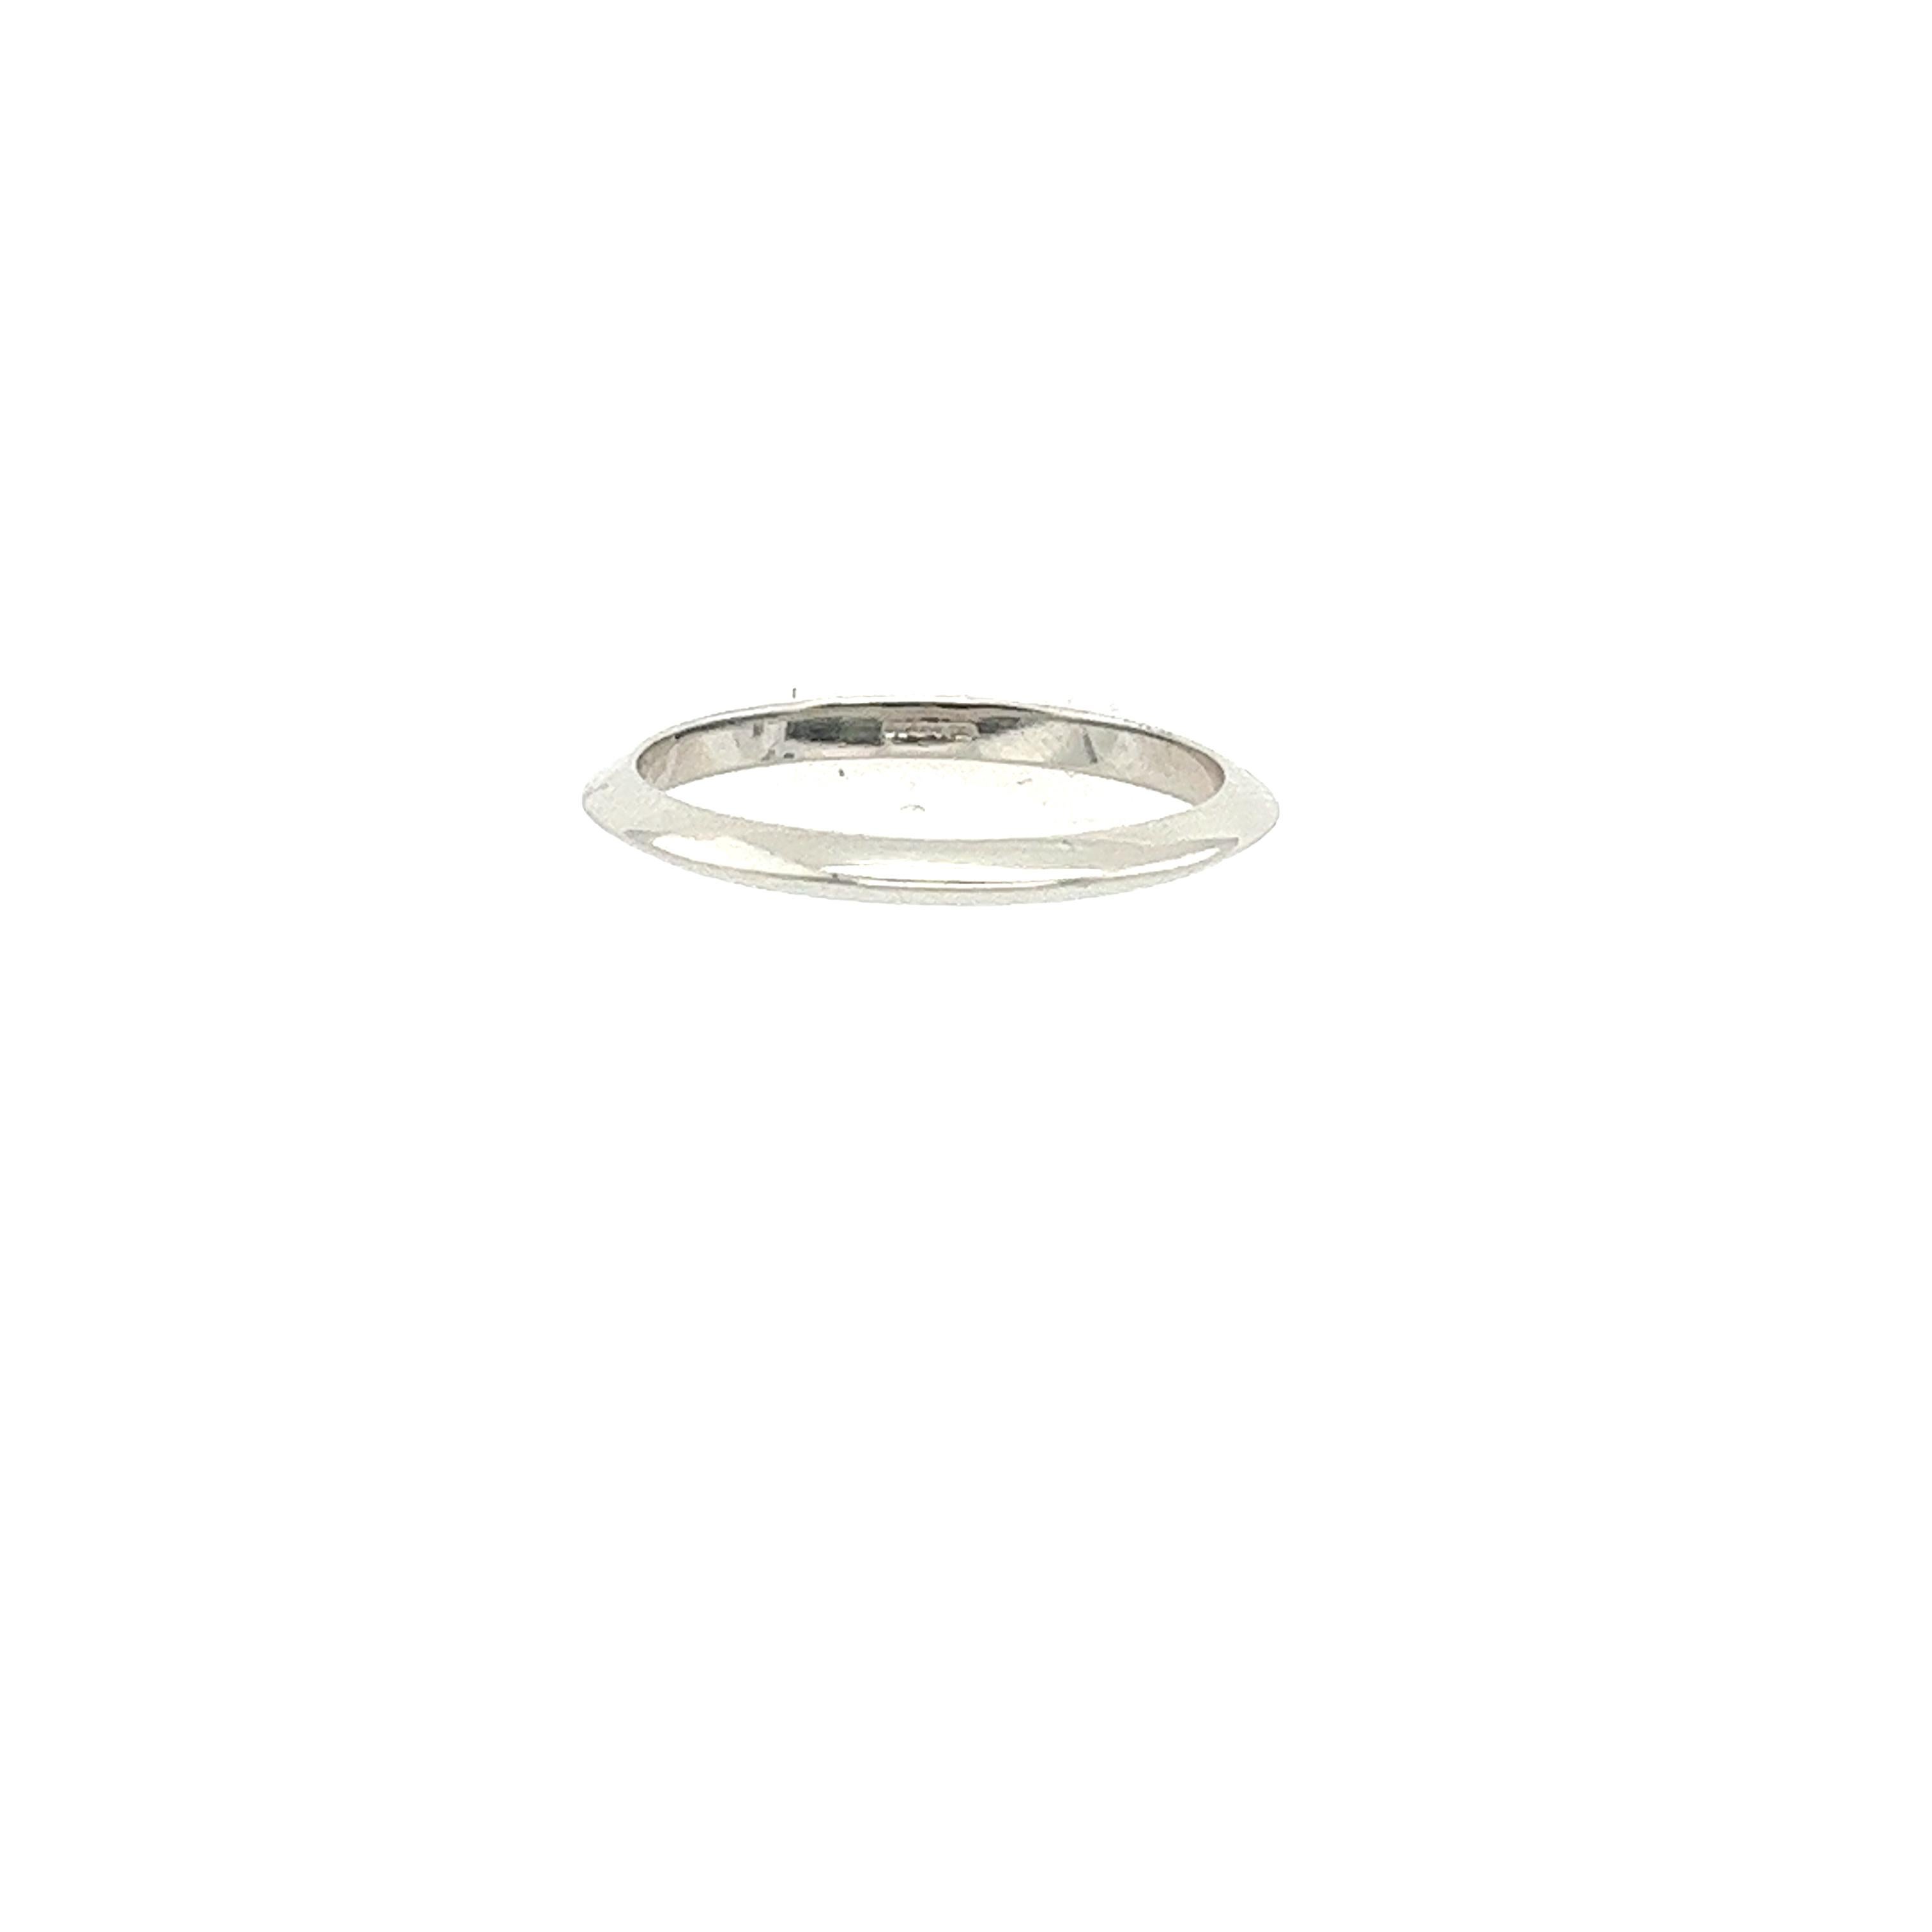 
A Tiffany & Co. platinum wedding band is a symbol of enduring love and commitment. Tiffany & Co. wedding bands feature timeless designs that complement any style or aesthetic. 

Width of Band: 1.75mm
Total  Weight: 2.06g
Ring Size: I1/2
Please note